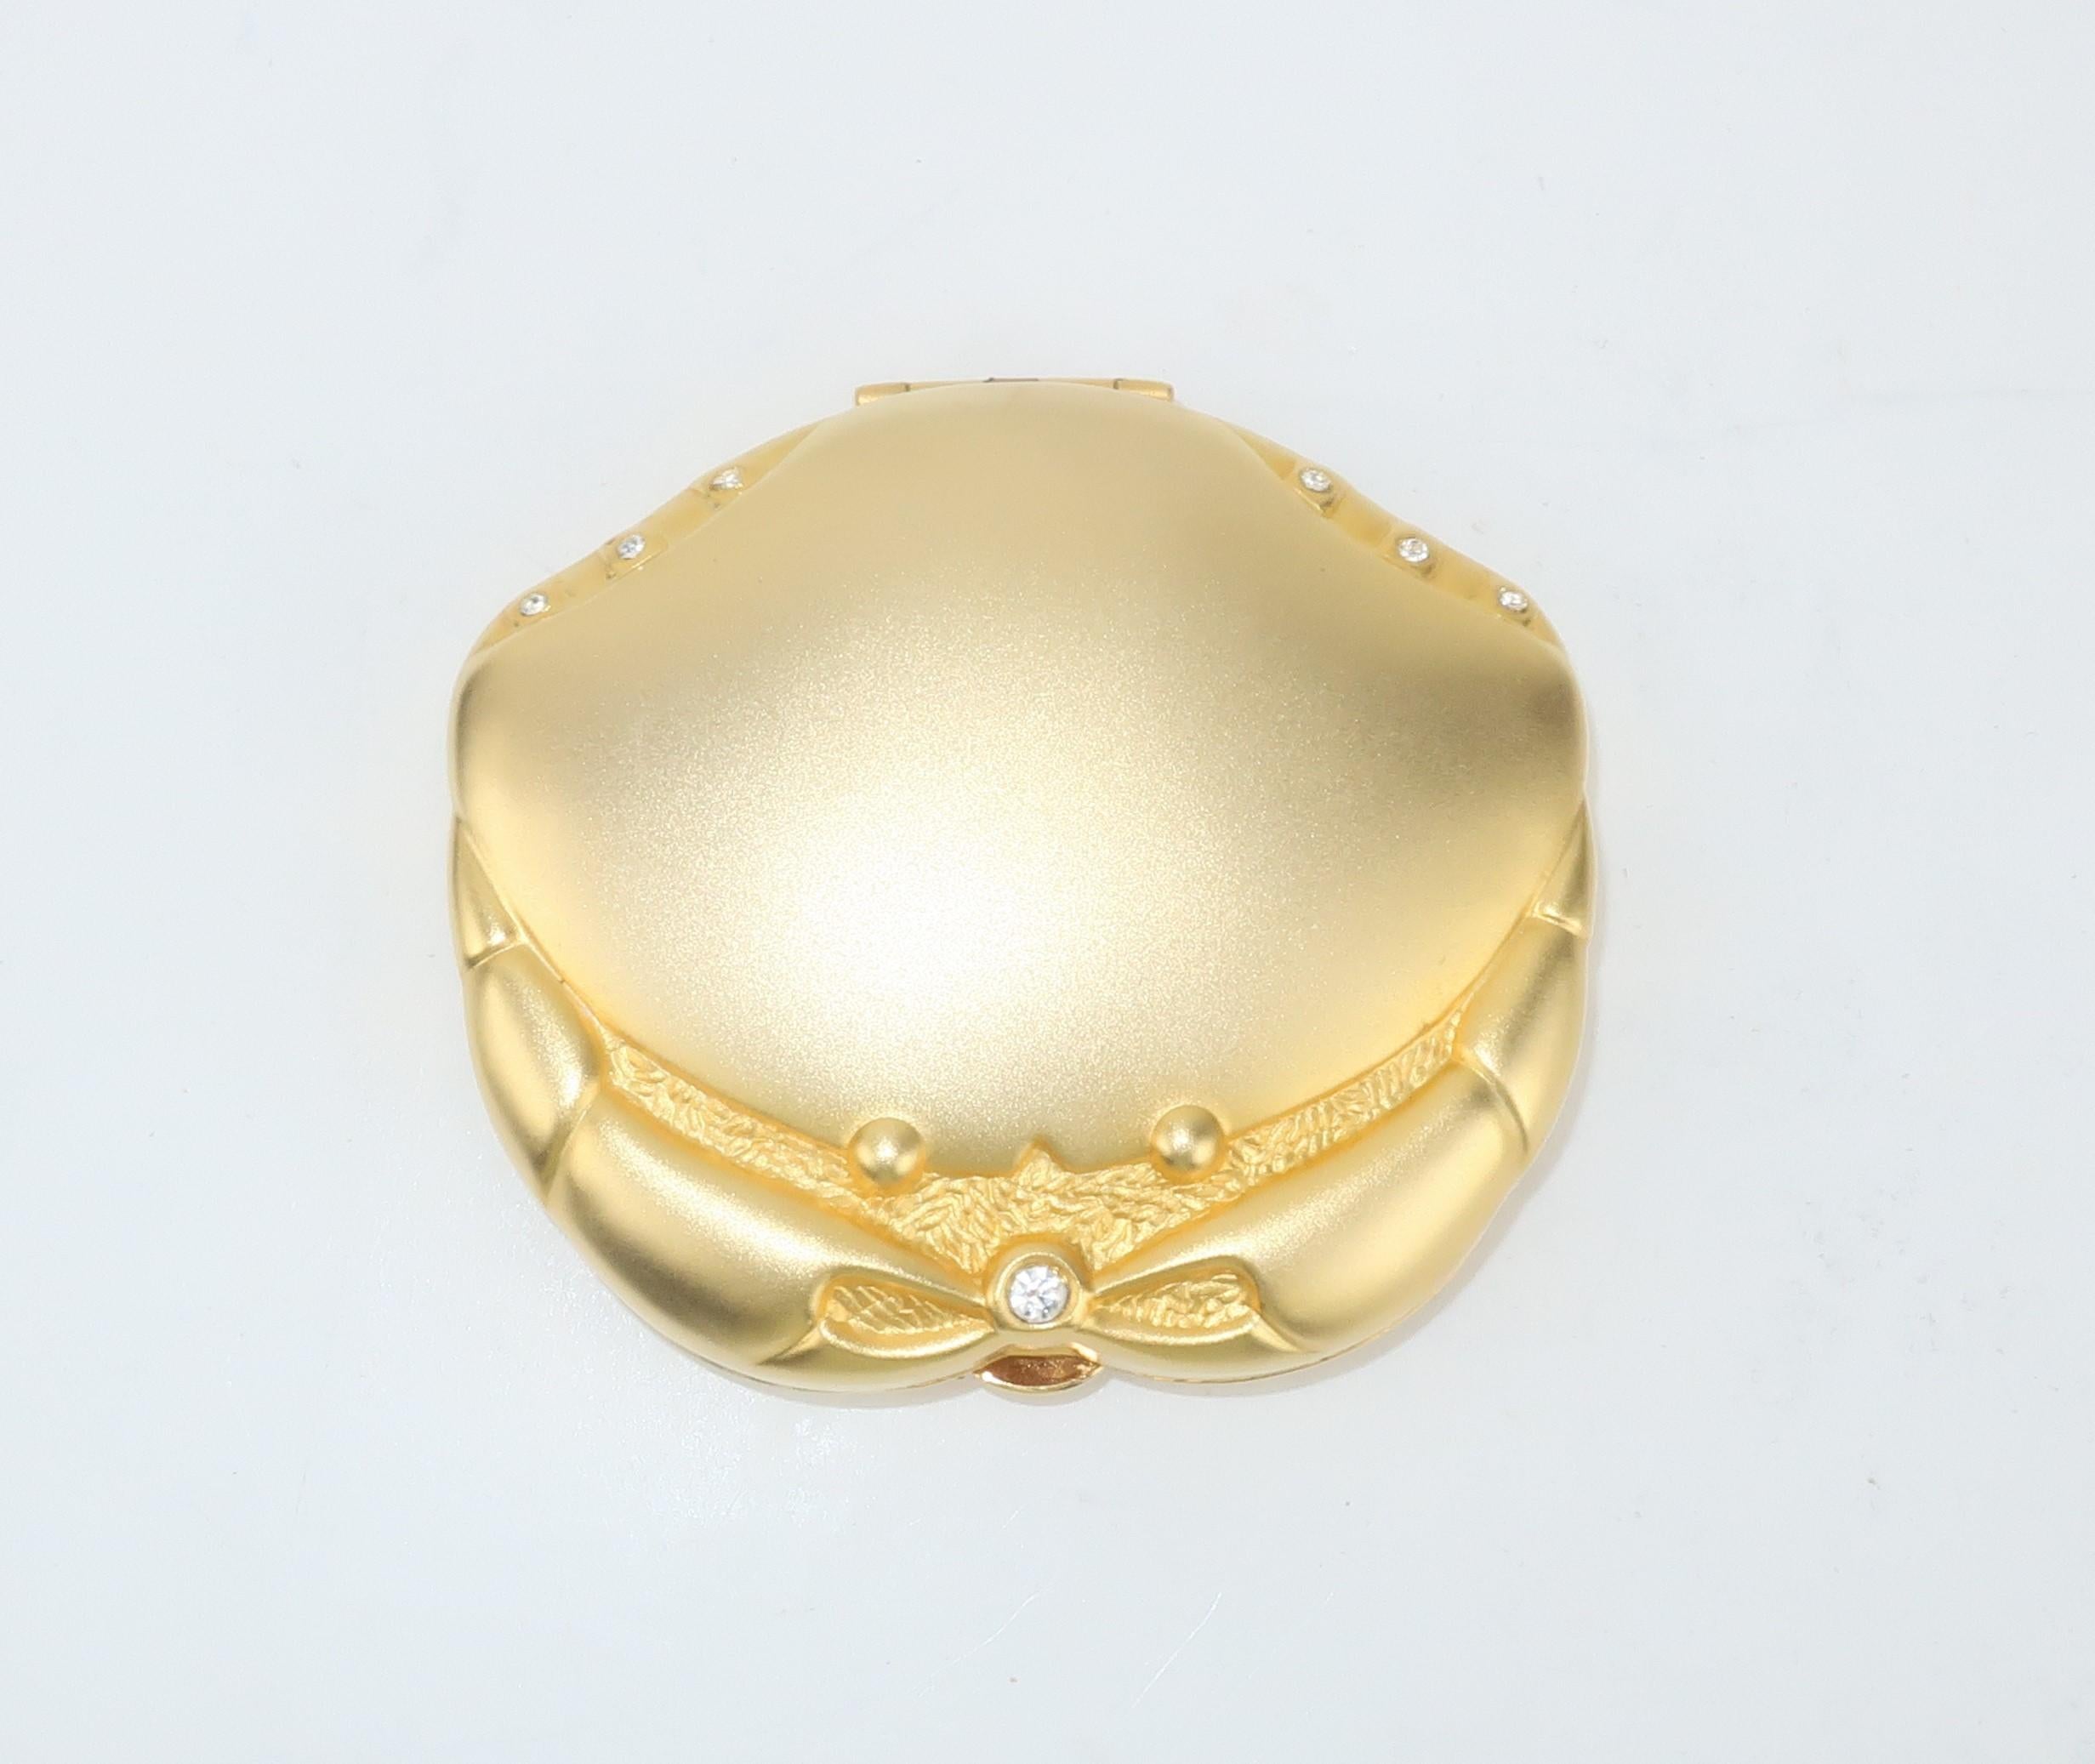 Estee Lauder's Golden Cancer gilt satin finished mirrored powder Zodiac compact accented by crystal rhinestones.  The push button closure opens to reveal mirror and pressed powder with puff.  Estee Lauder has been producing limited edition compacts